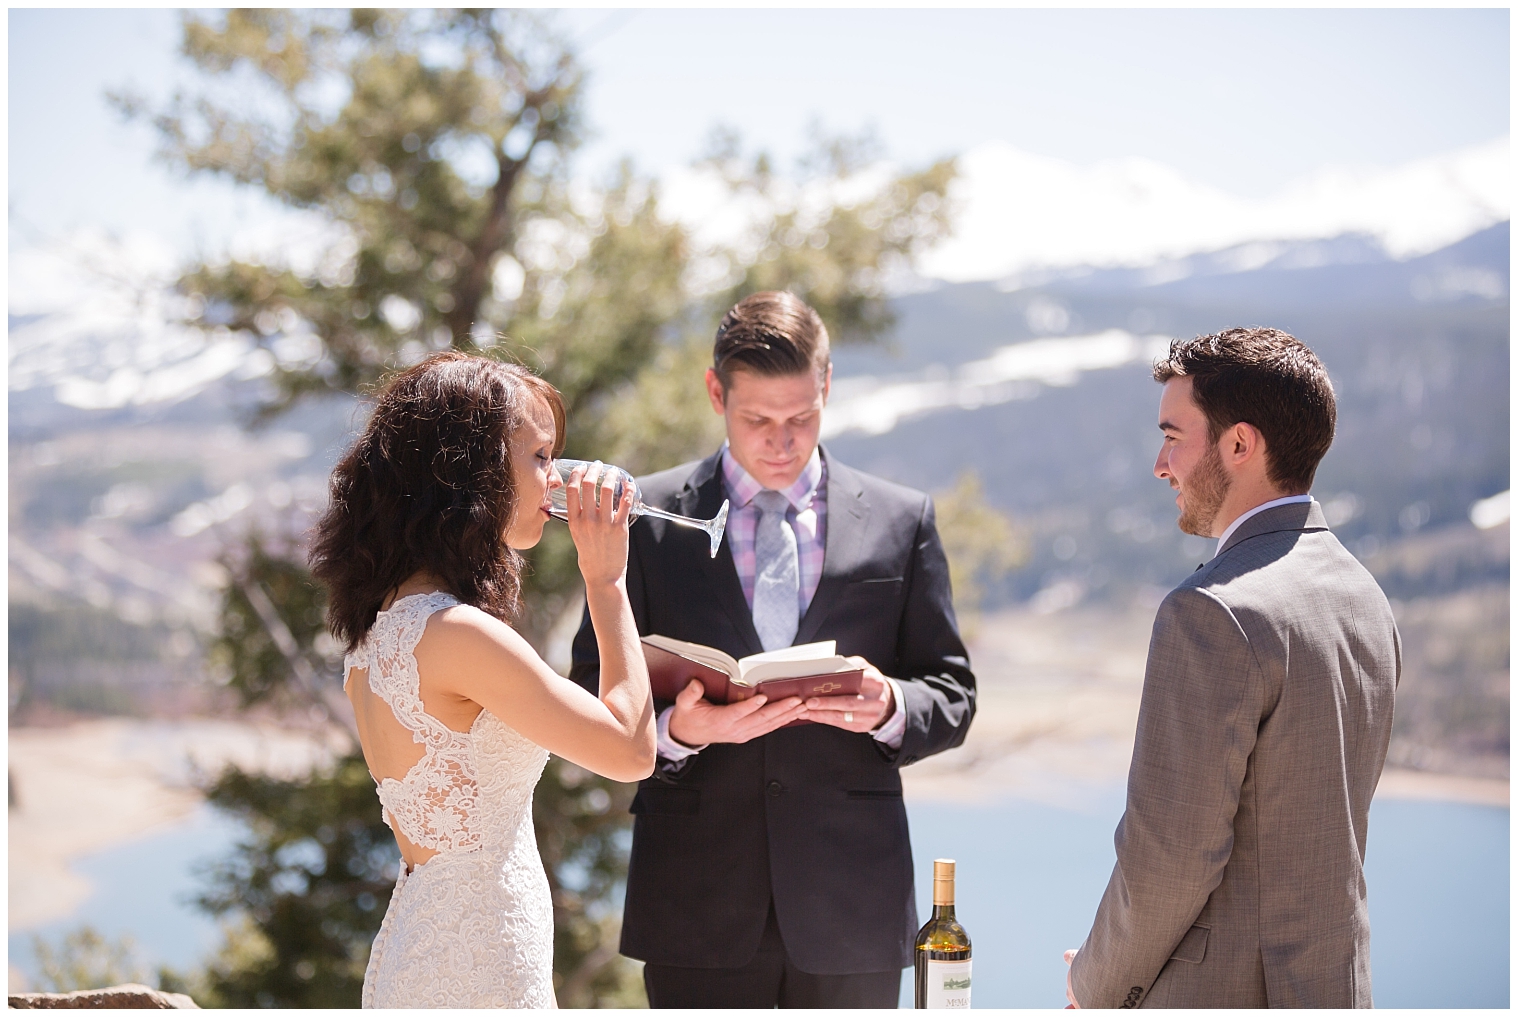 During a wine unity ceremony, the bride drinks wine at her Colorado mountain elopement.